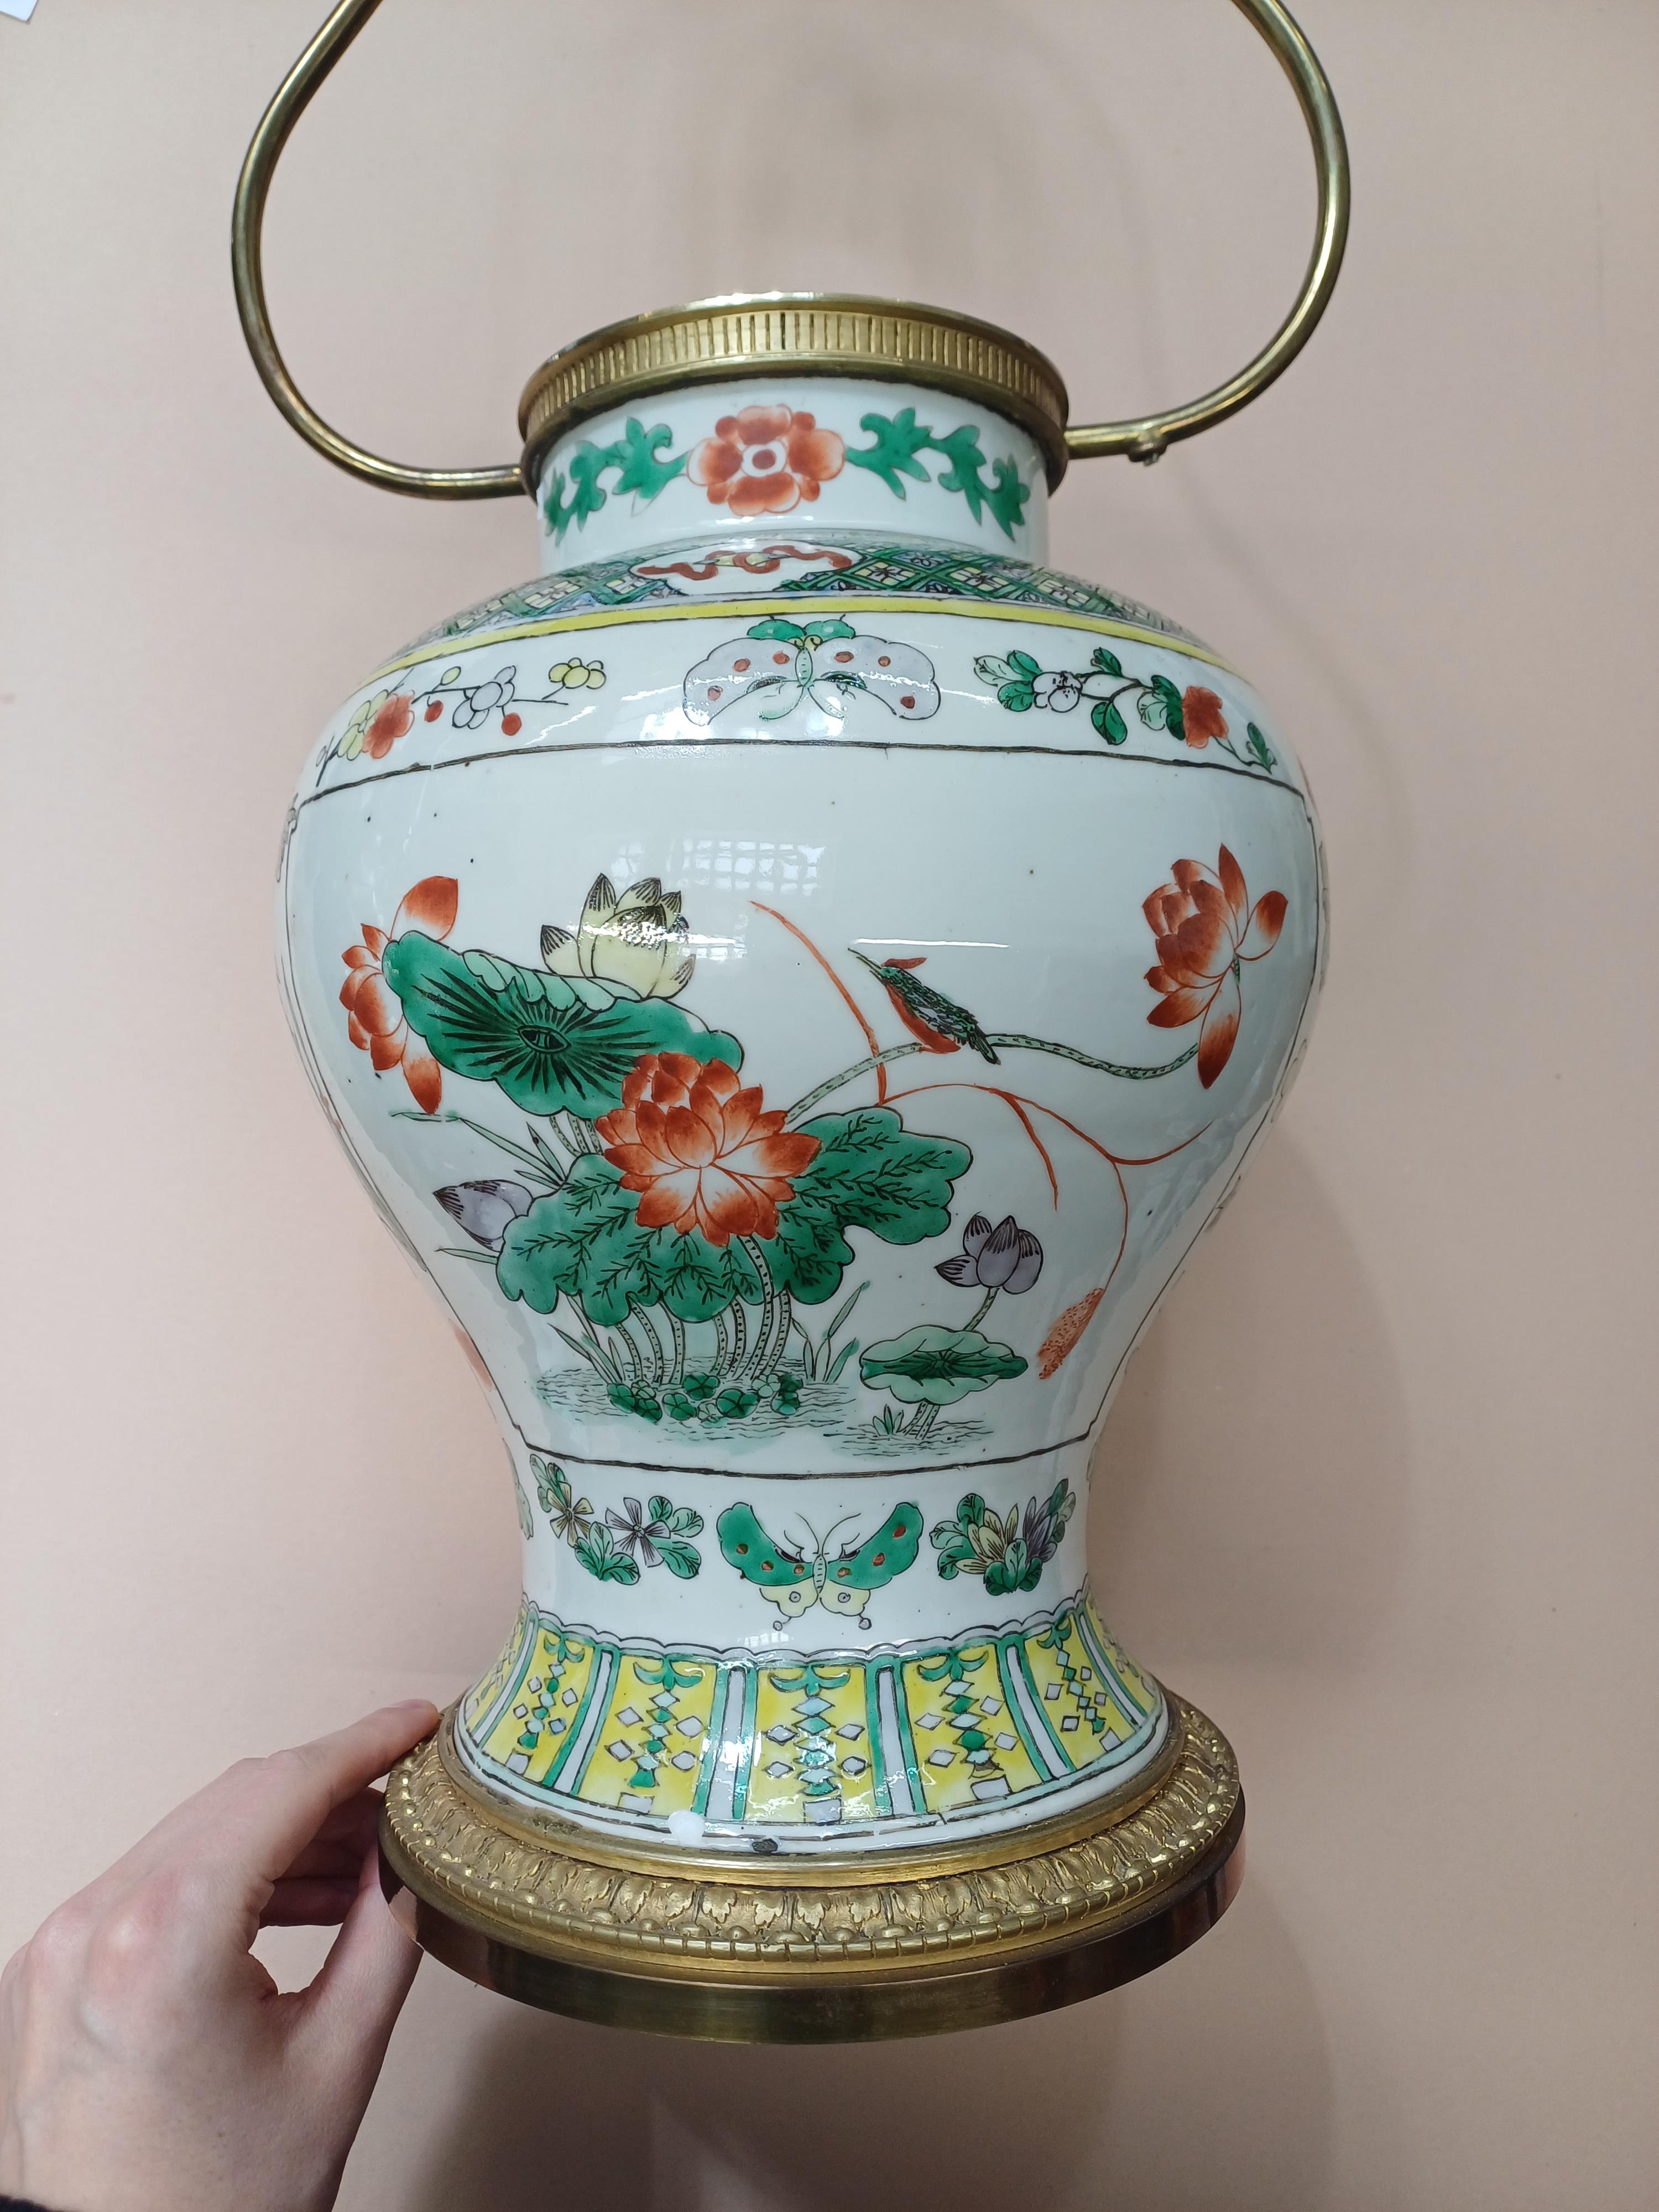 A CHINESE FAMILLE-VERTE 'LOTUS POND' VASE AND COVER 晚清五彩蓮池紋將軍罐 - Image 11 of 14